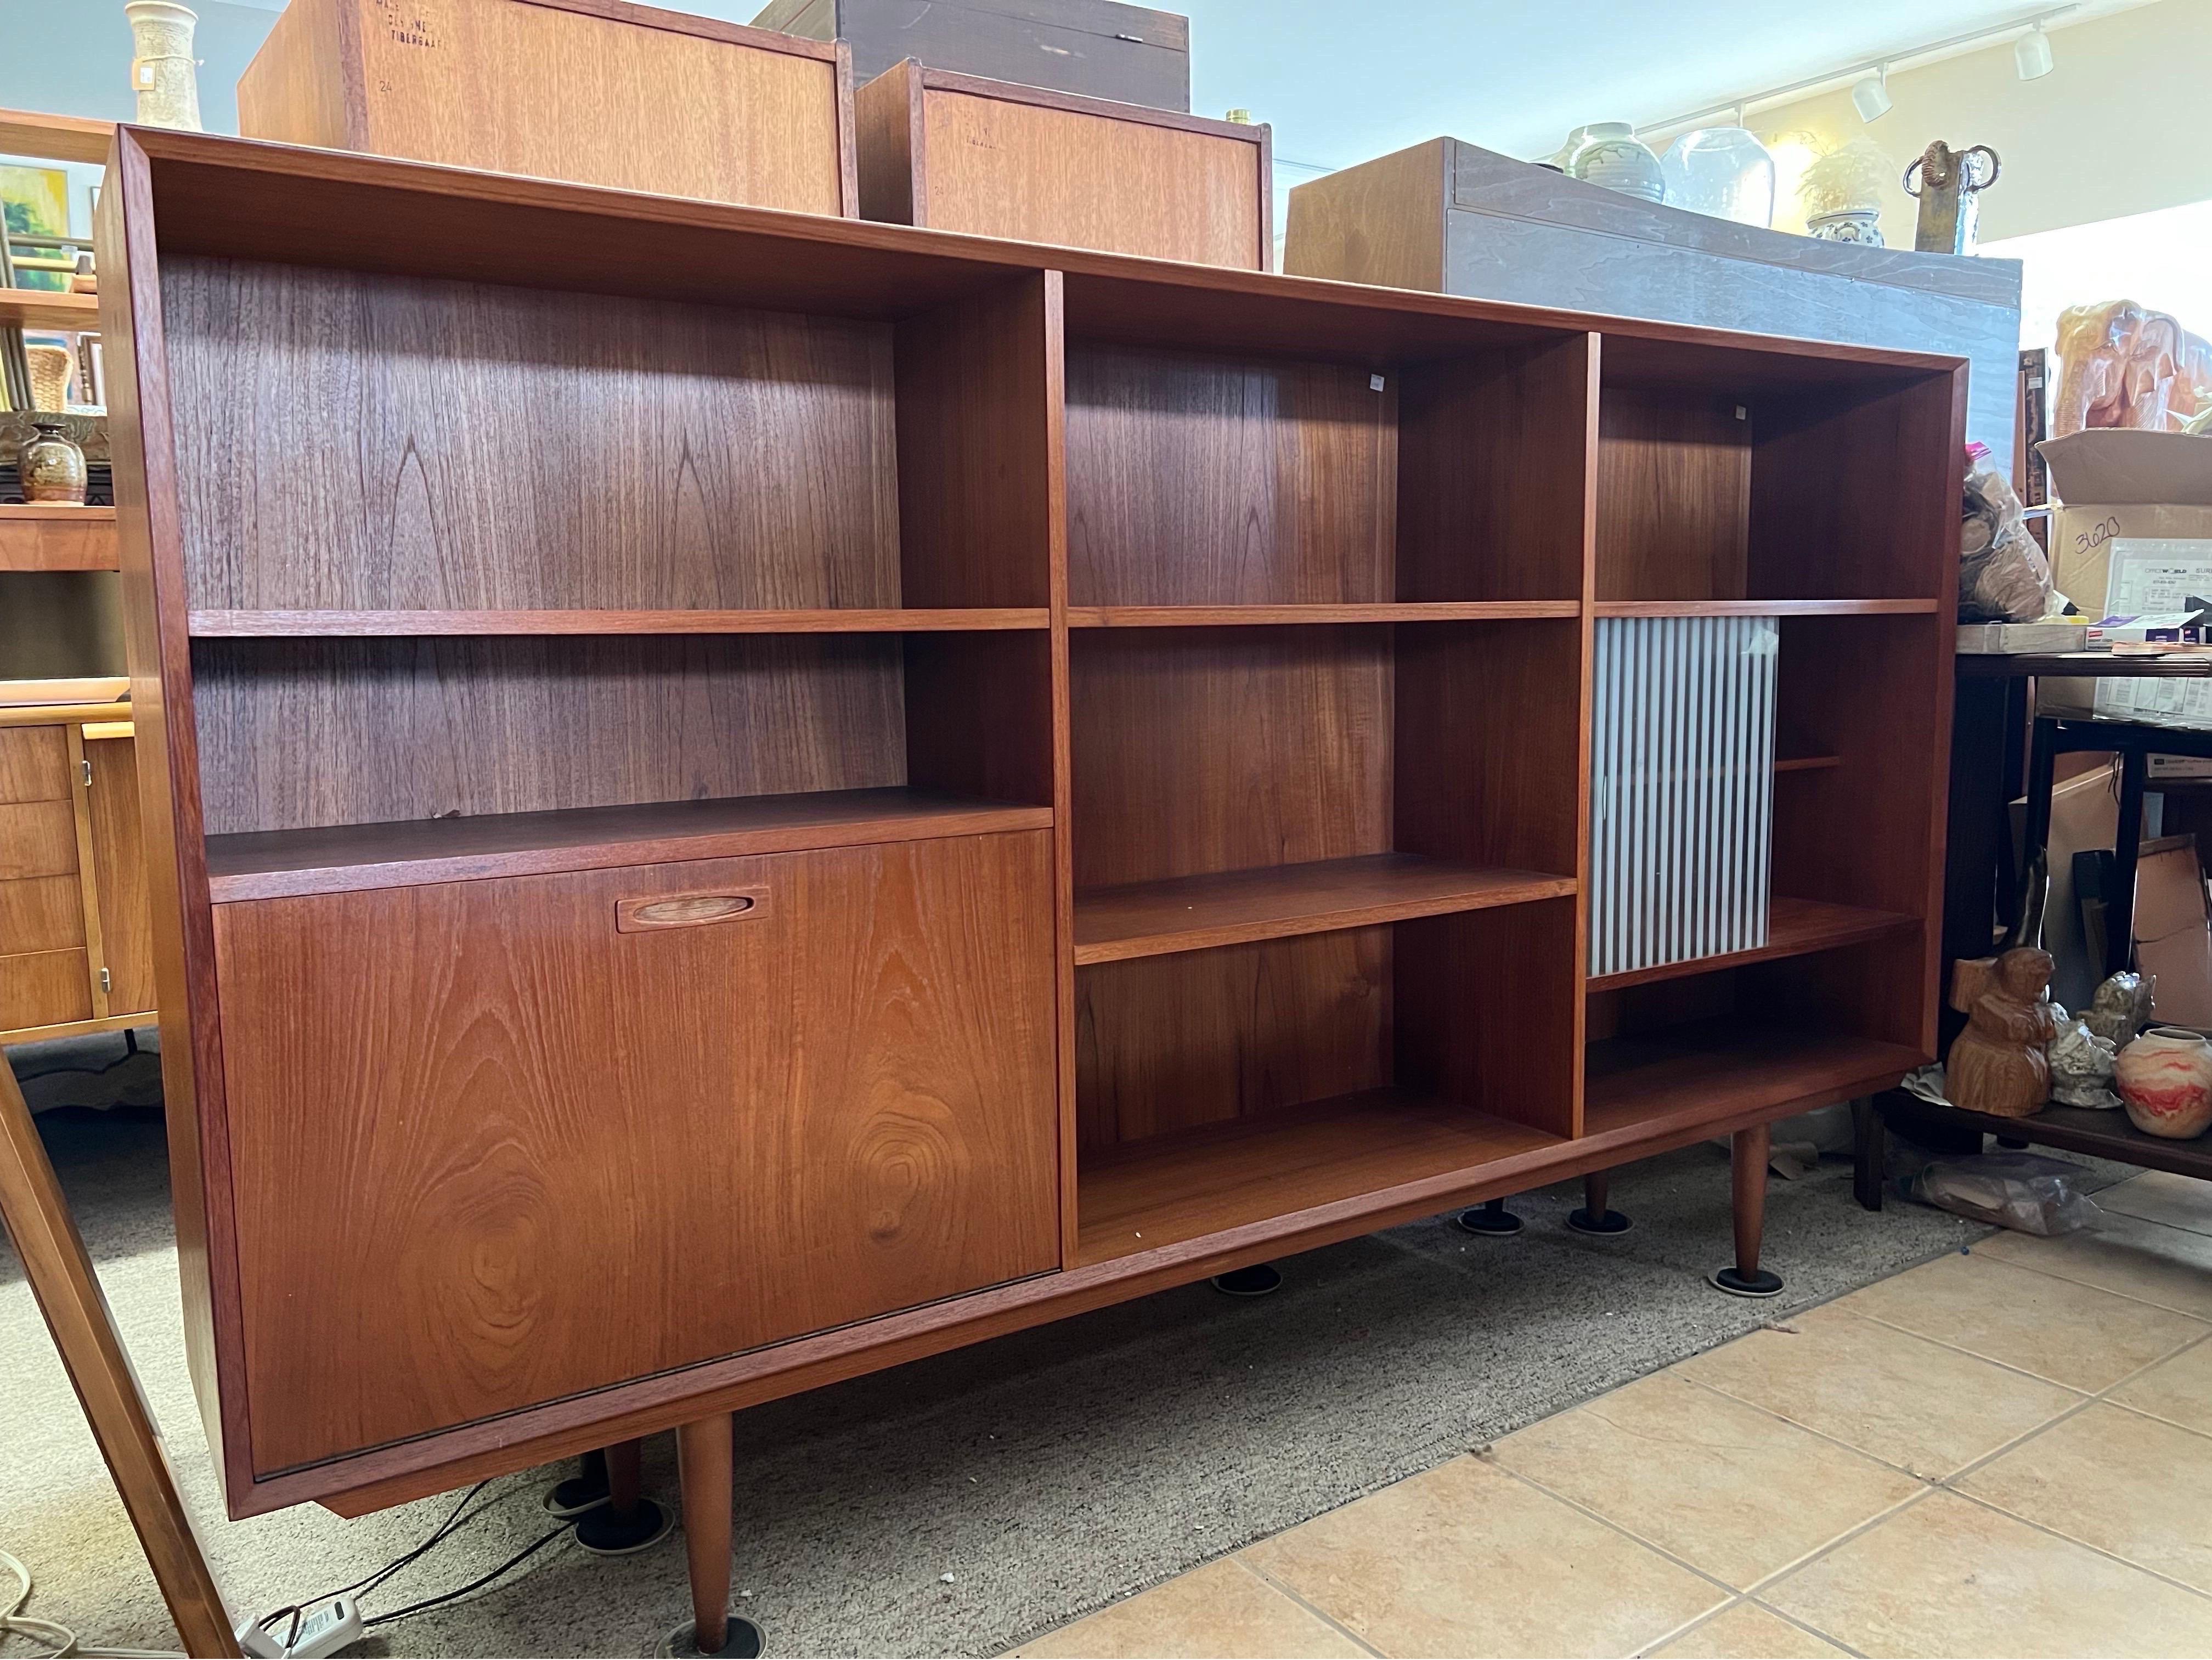 Vintage Danish Mid-Century Modern teak bookcase or bar unit
Dimensions. 79 W ; 44 1/2 H ; 12 D

( Middle Column Shelf are Adjustable)

Right Top 25 W ; 11 H ; 11 D

Right Middle. 25 W ; 15 H ; 11 D

Right Bottom. 25 W ; 6 H ; 11 D

Left